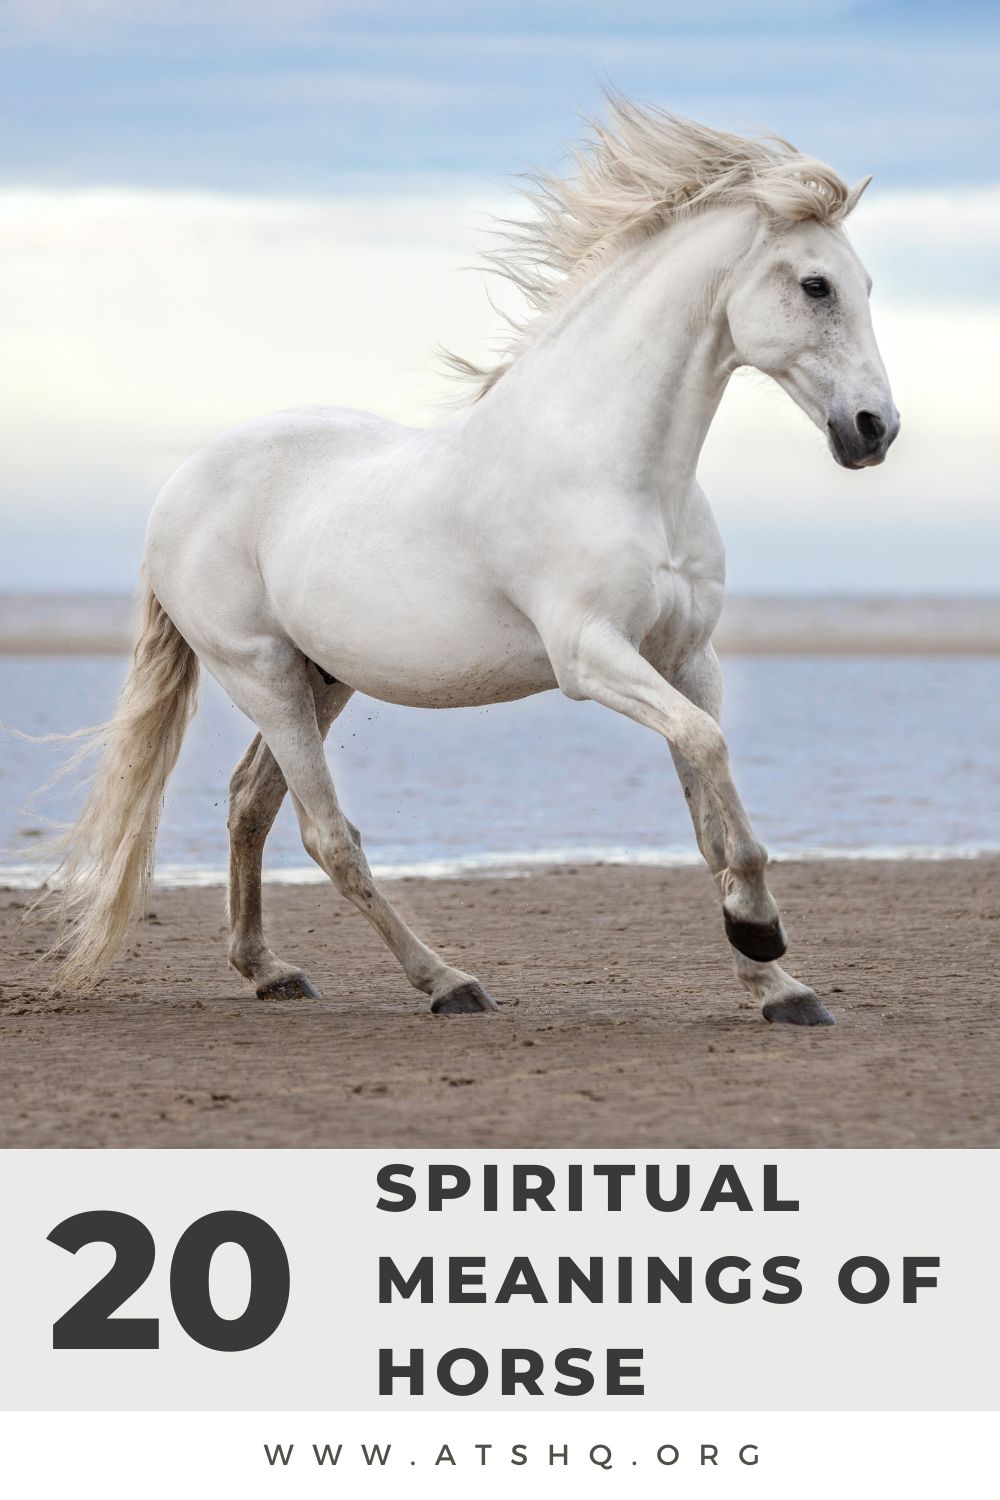 20 Spiritual Meanings of Horse